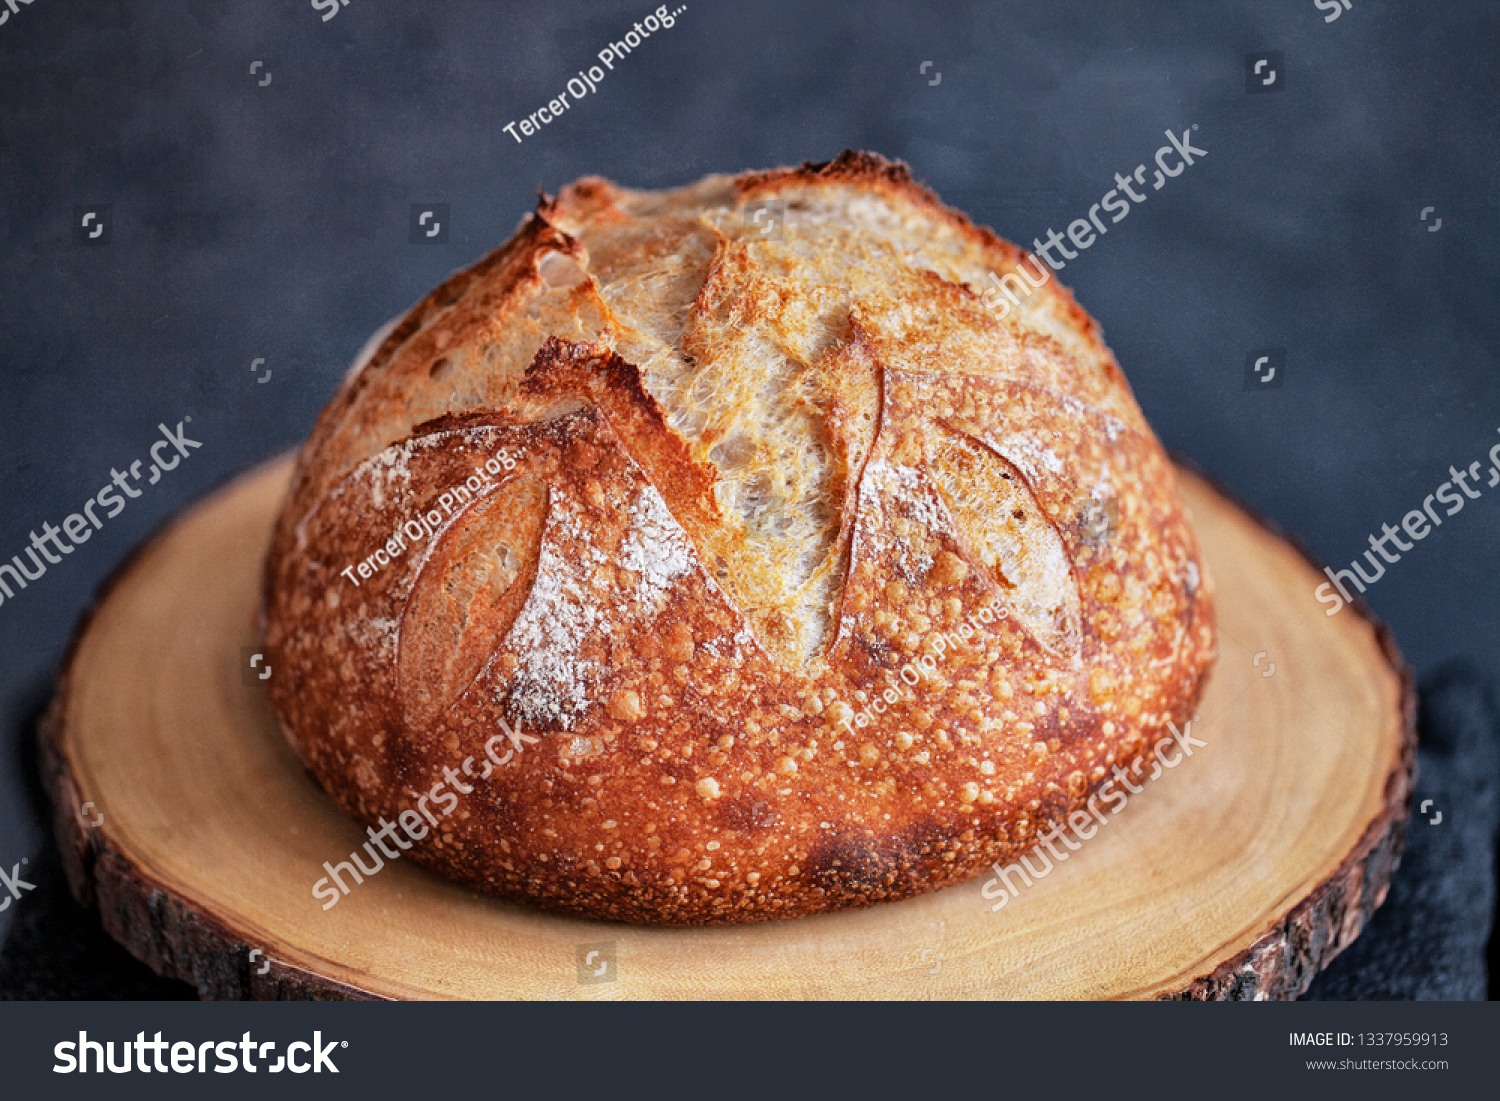 Round loaf of freshly baked homemade artisan sourdough bread on a round wood plank #1337959913